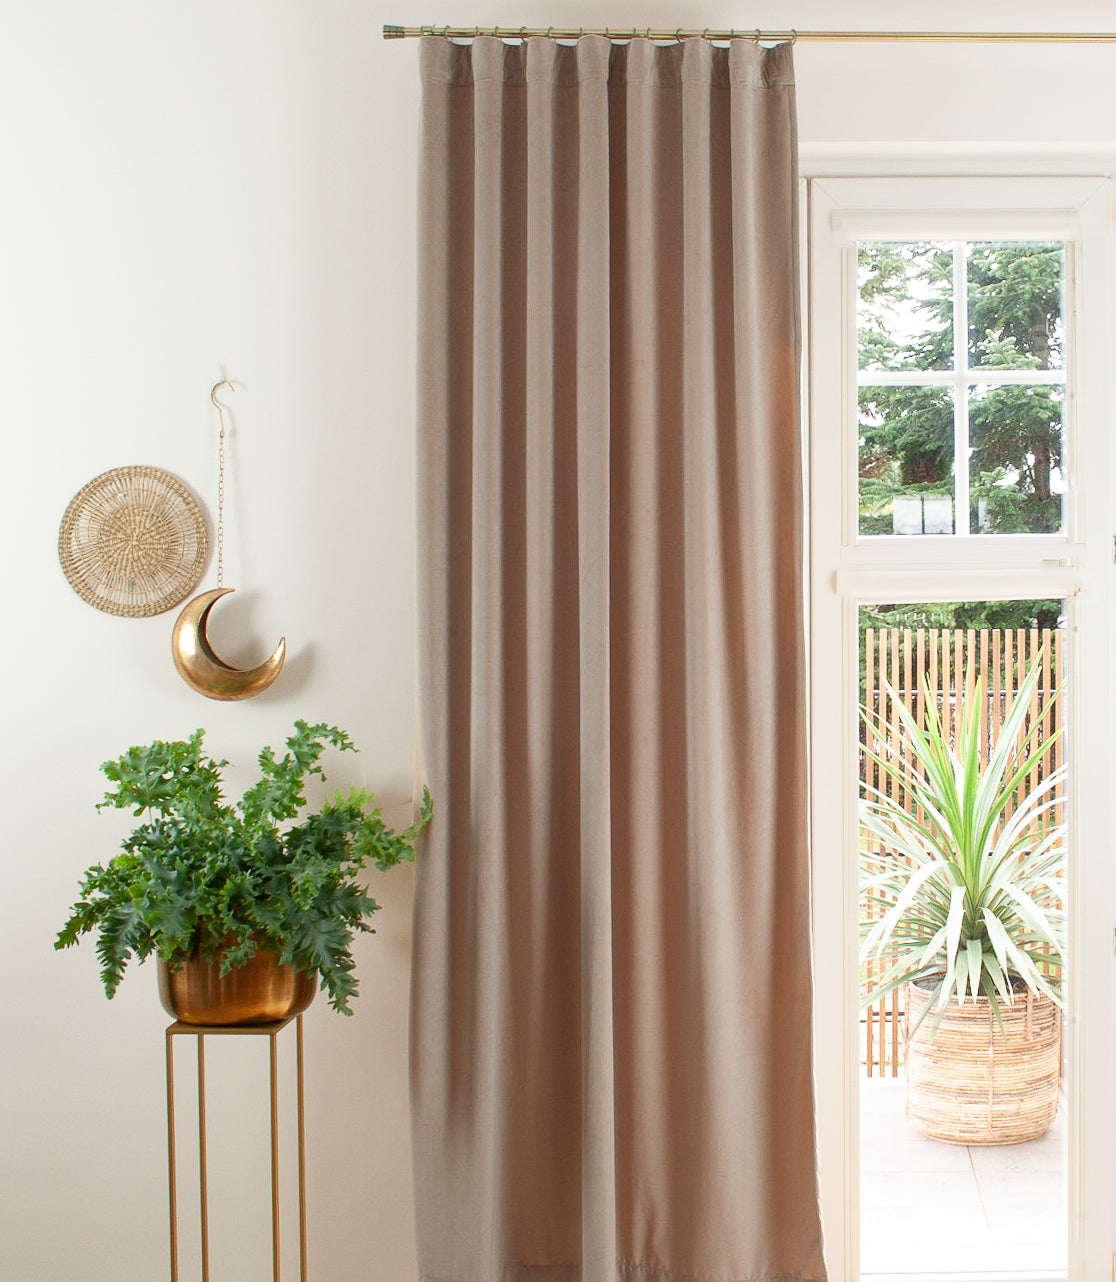 Velvet Curtains - With Different Headings: Back Tabs, Tab Top, Grommet, Rod Pocket, Pencil Pleat, or Pinch Pleat